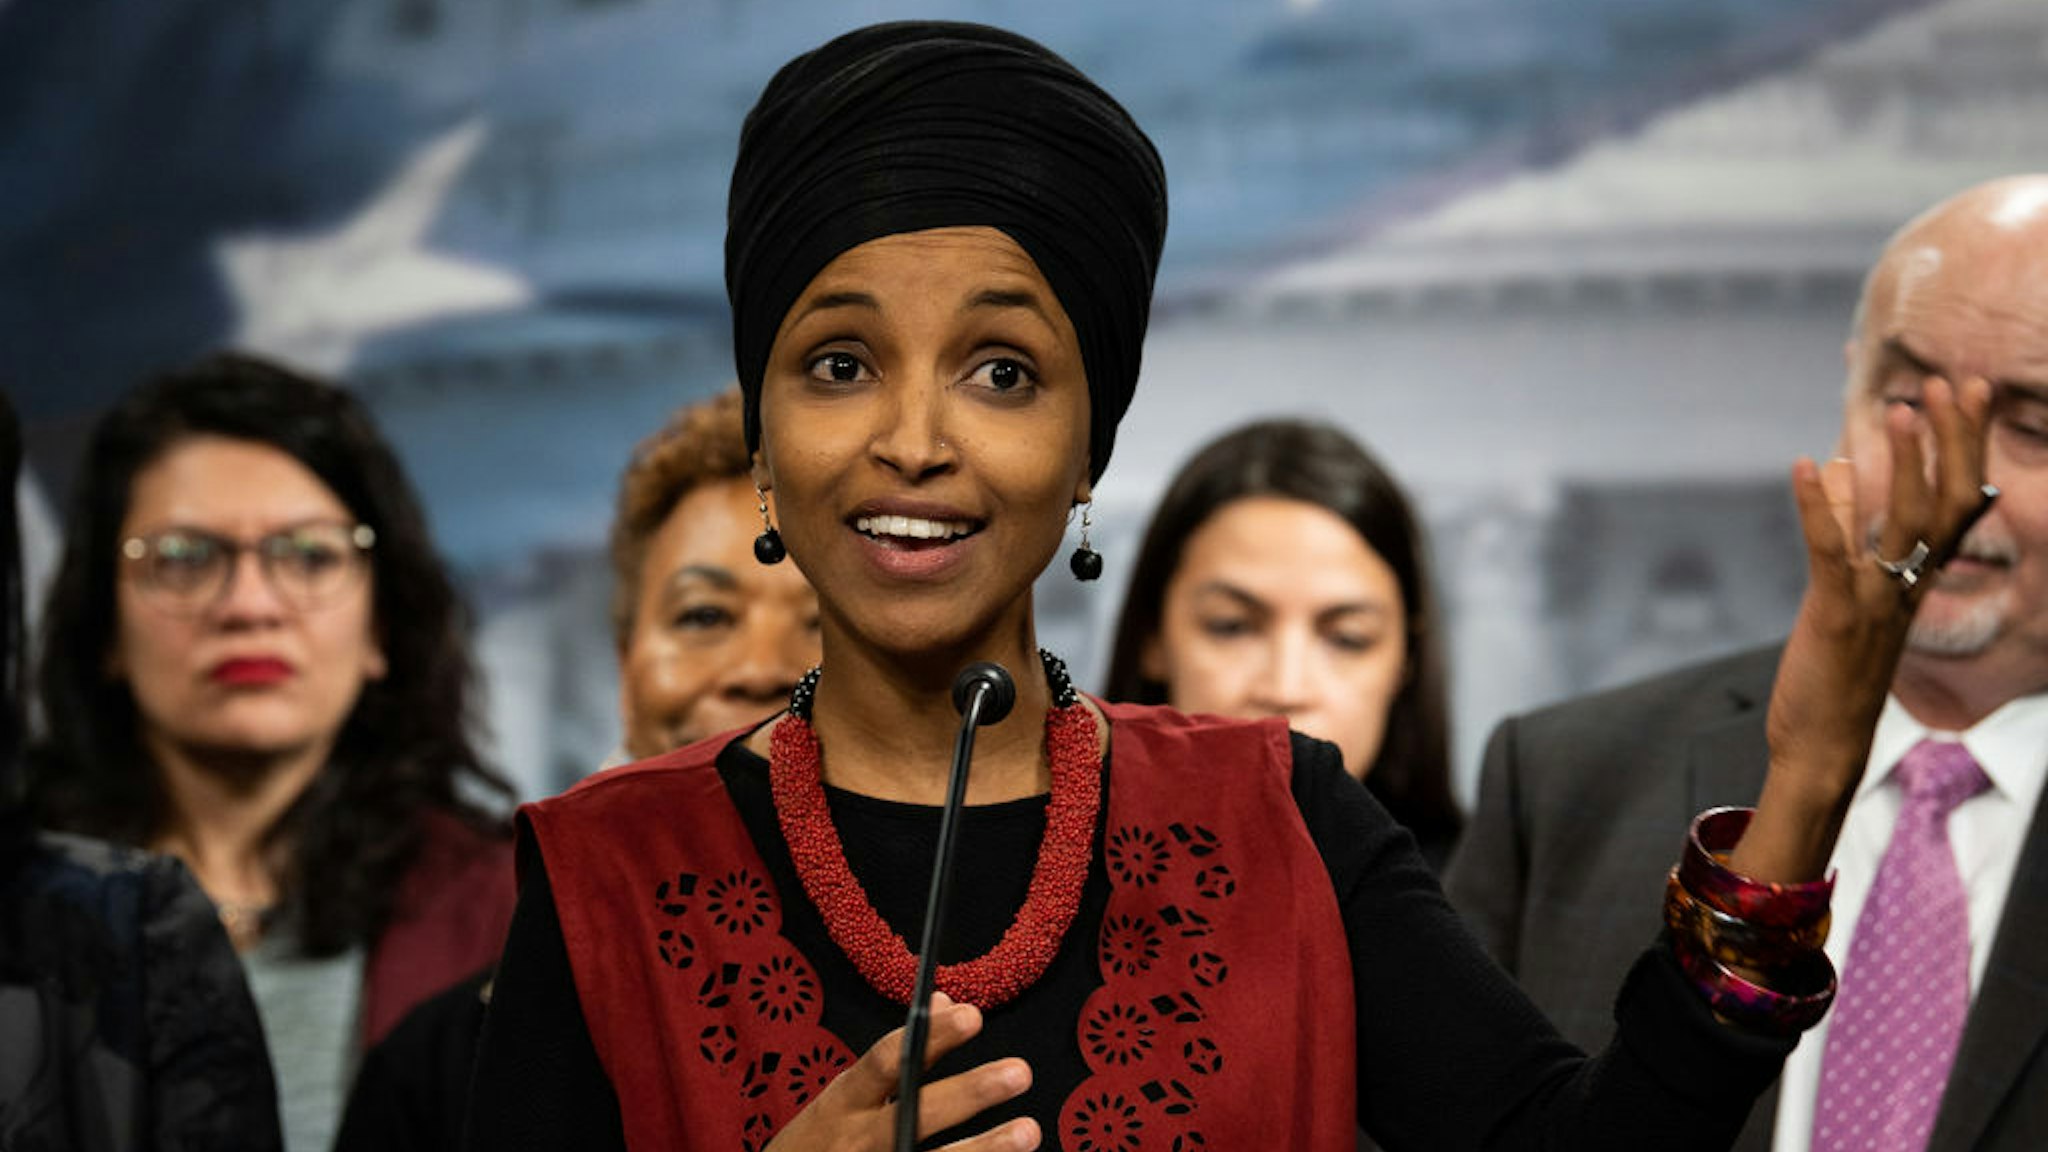 U.S. Representative Ilhan Omar (D-MN) speaking about the situation in Iran and Iraq at a press conference organized by the Congressional Progressive Caucus (CPC)